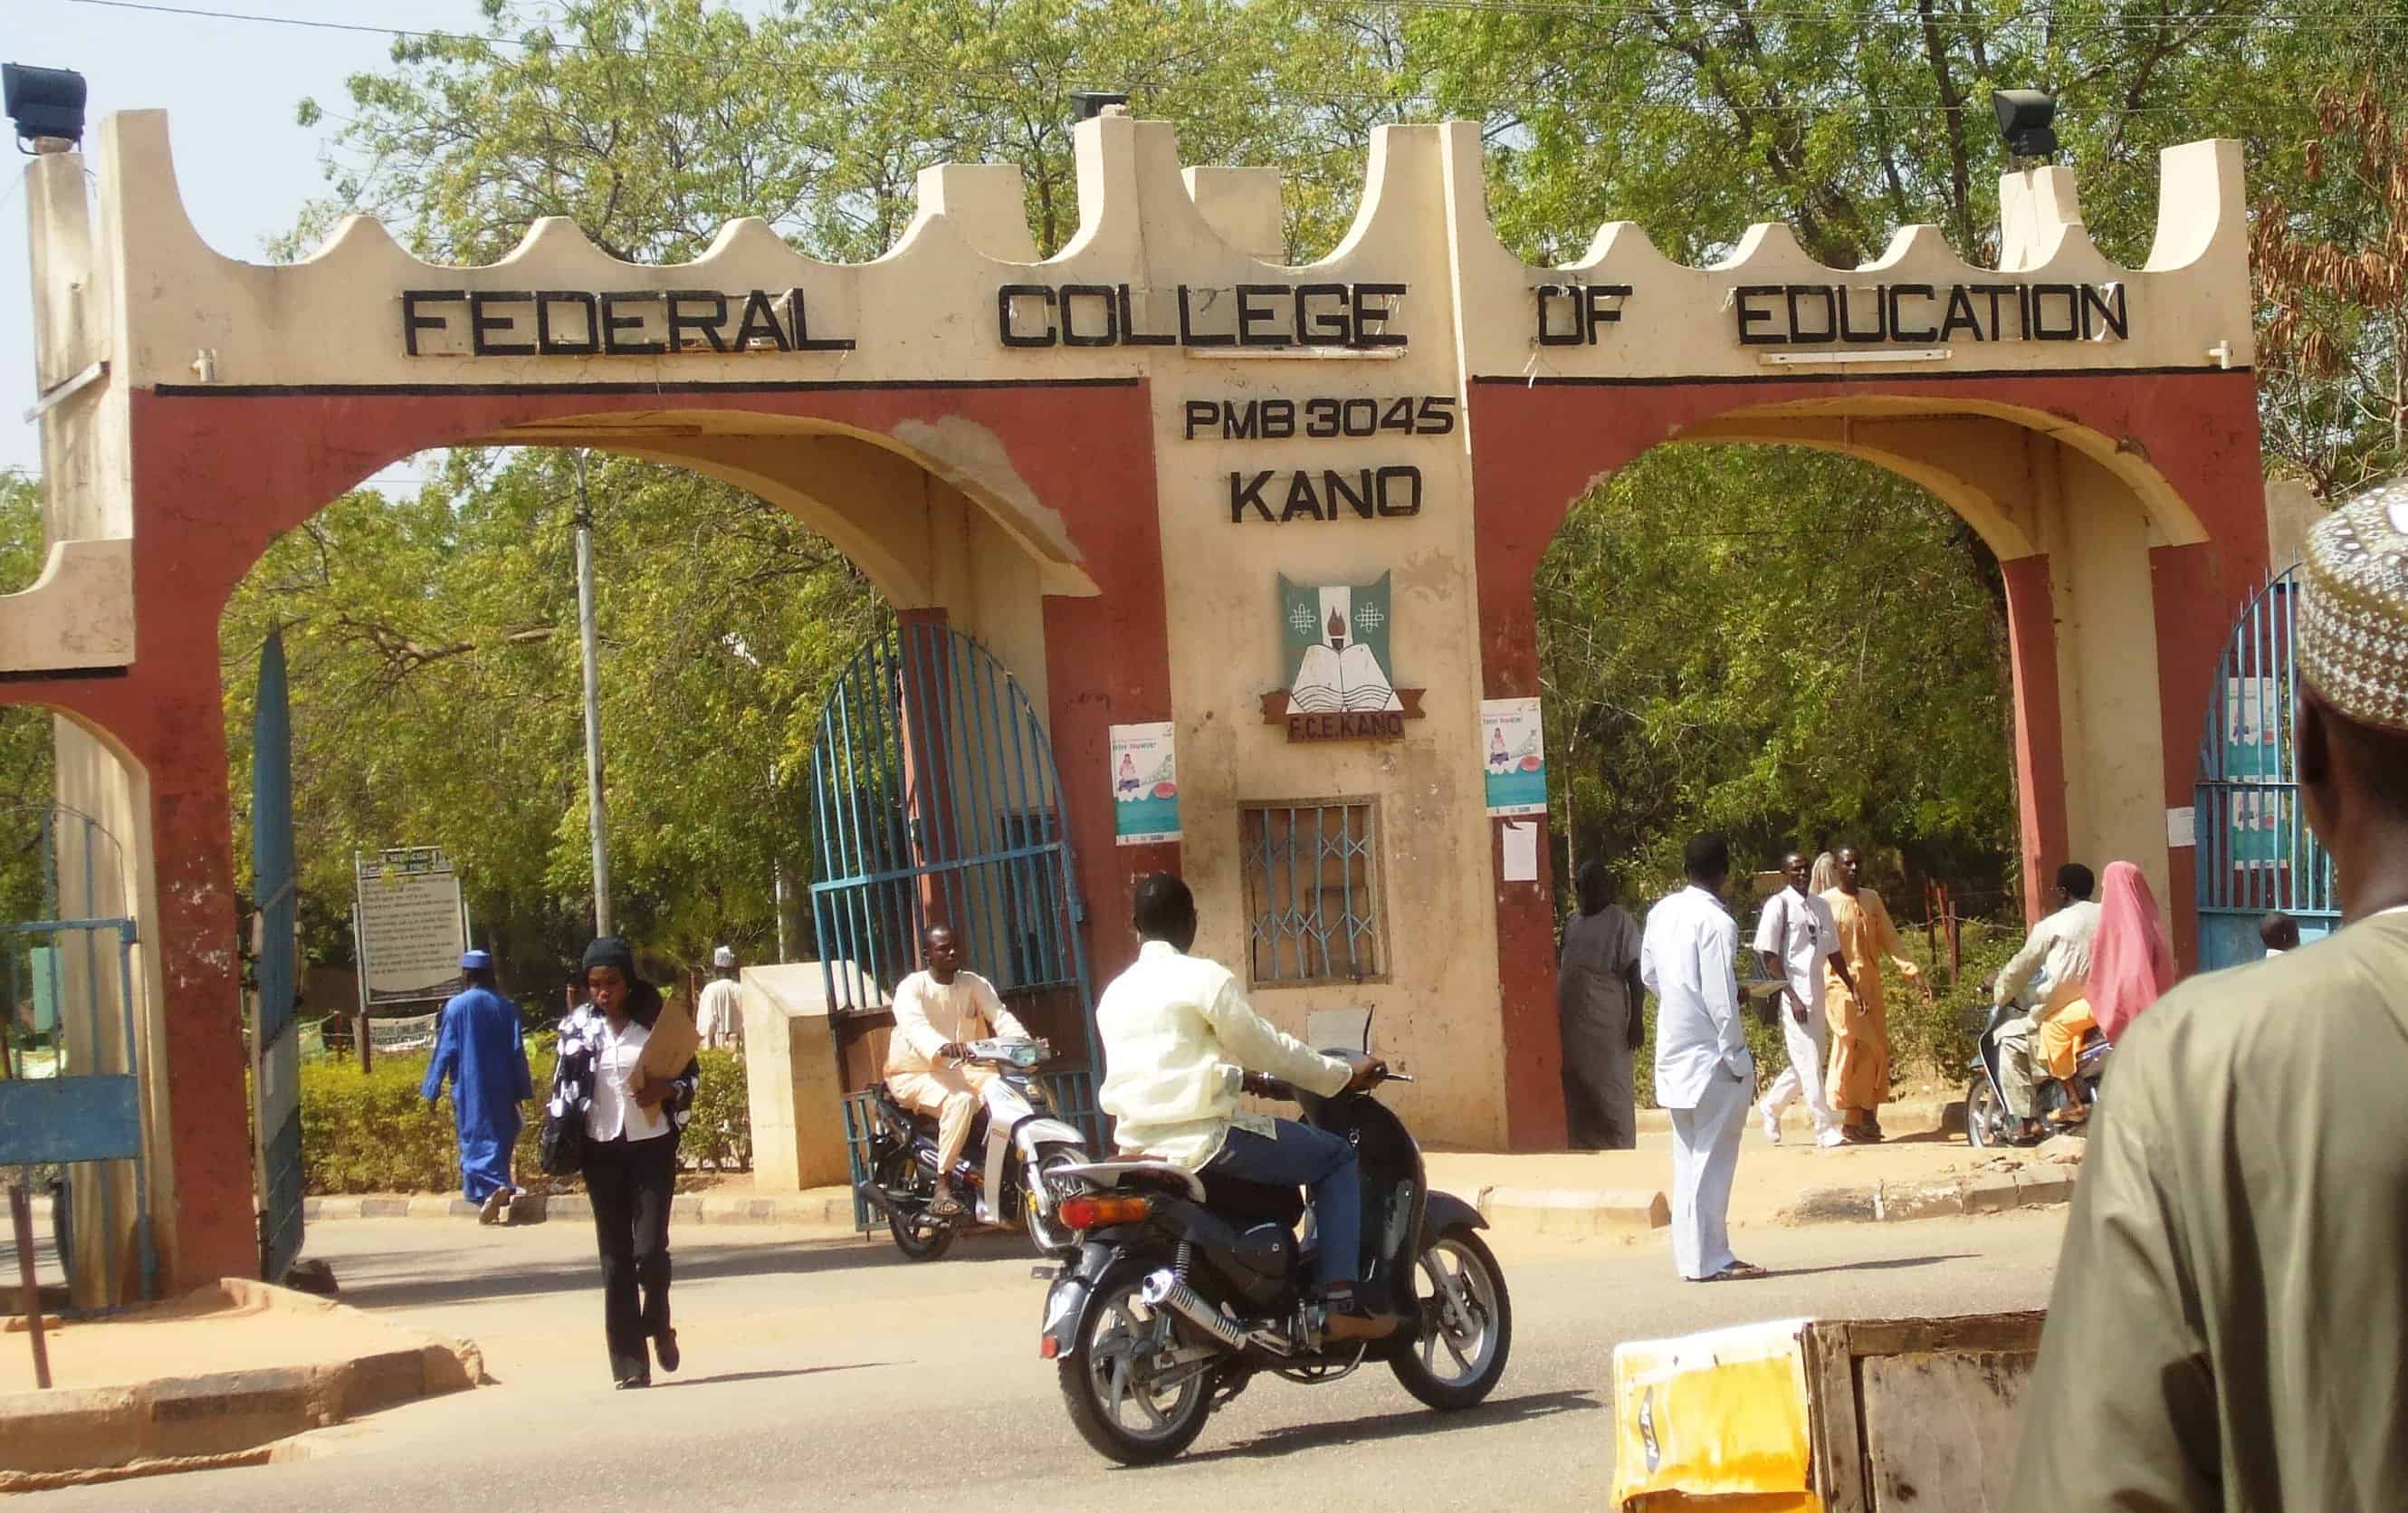 Federal College of Education (FCE) Kano NCE Part-Time Admission List